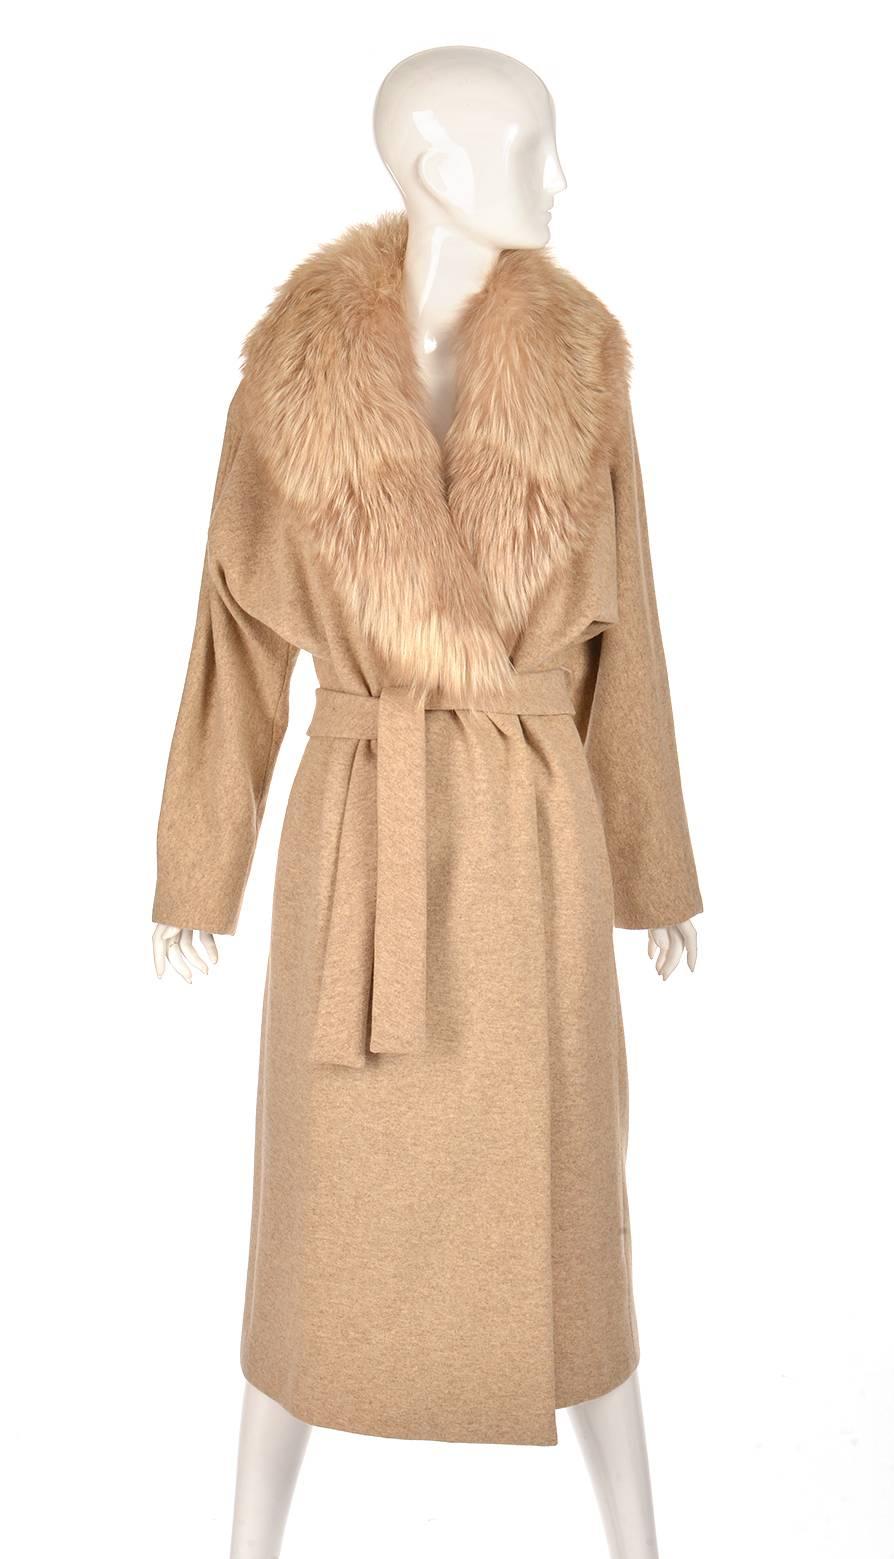 This romantic gold, cream, and fox coat was designed by Bill Blass. The coat is composed of wool accented with a fox fur collar. The coat has a loose, airy silhouette with an adjustable belt. This coat is an elegant classic.

It is in lovely